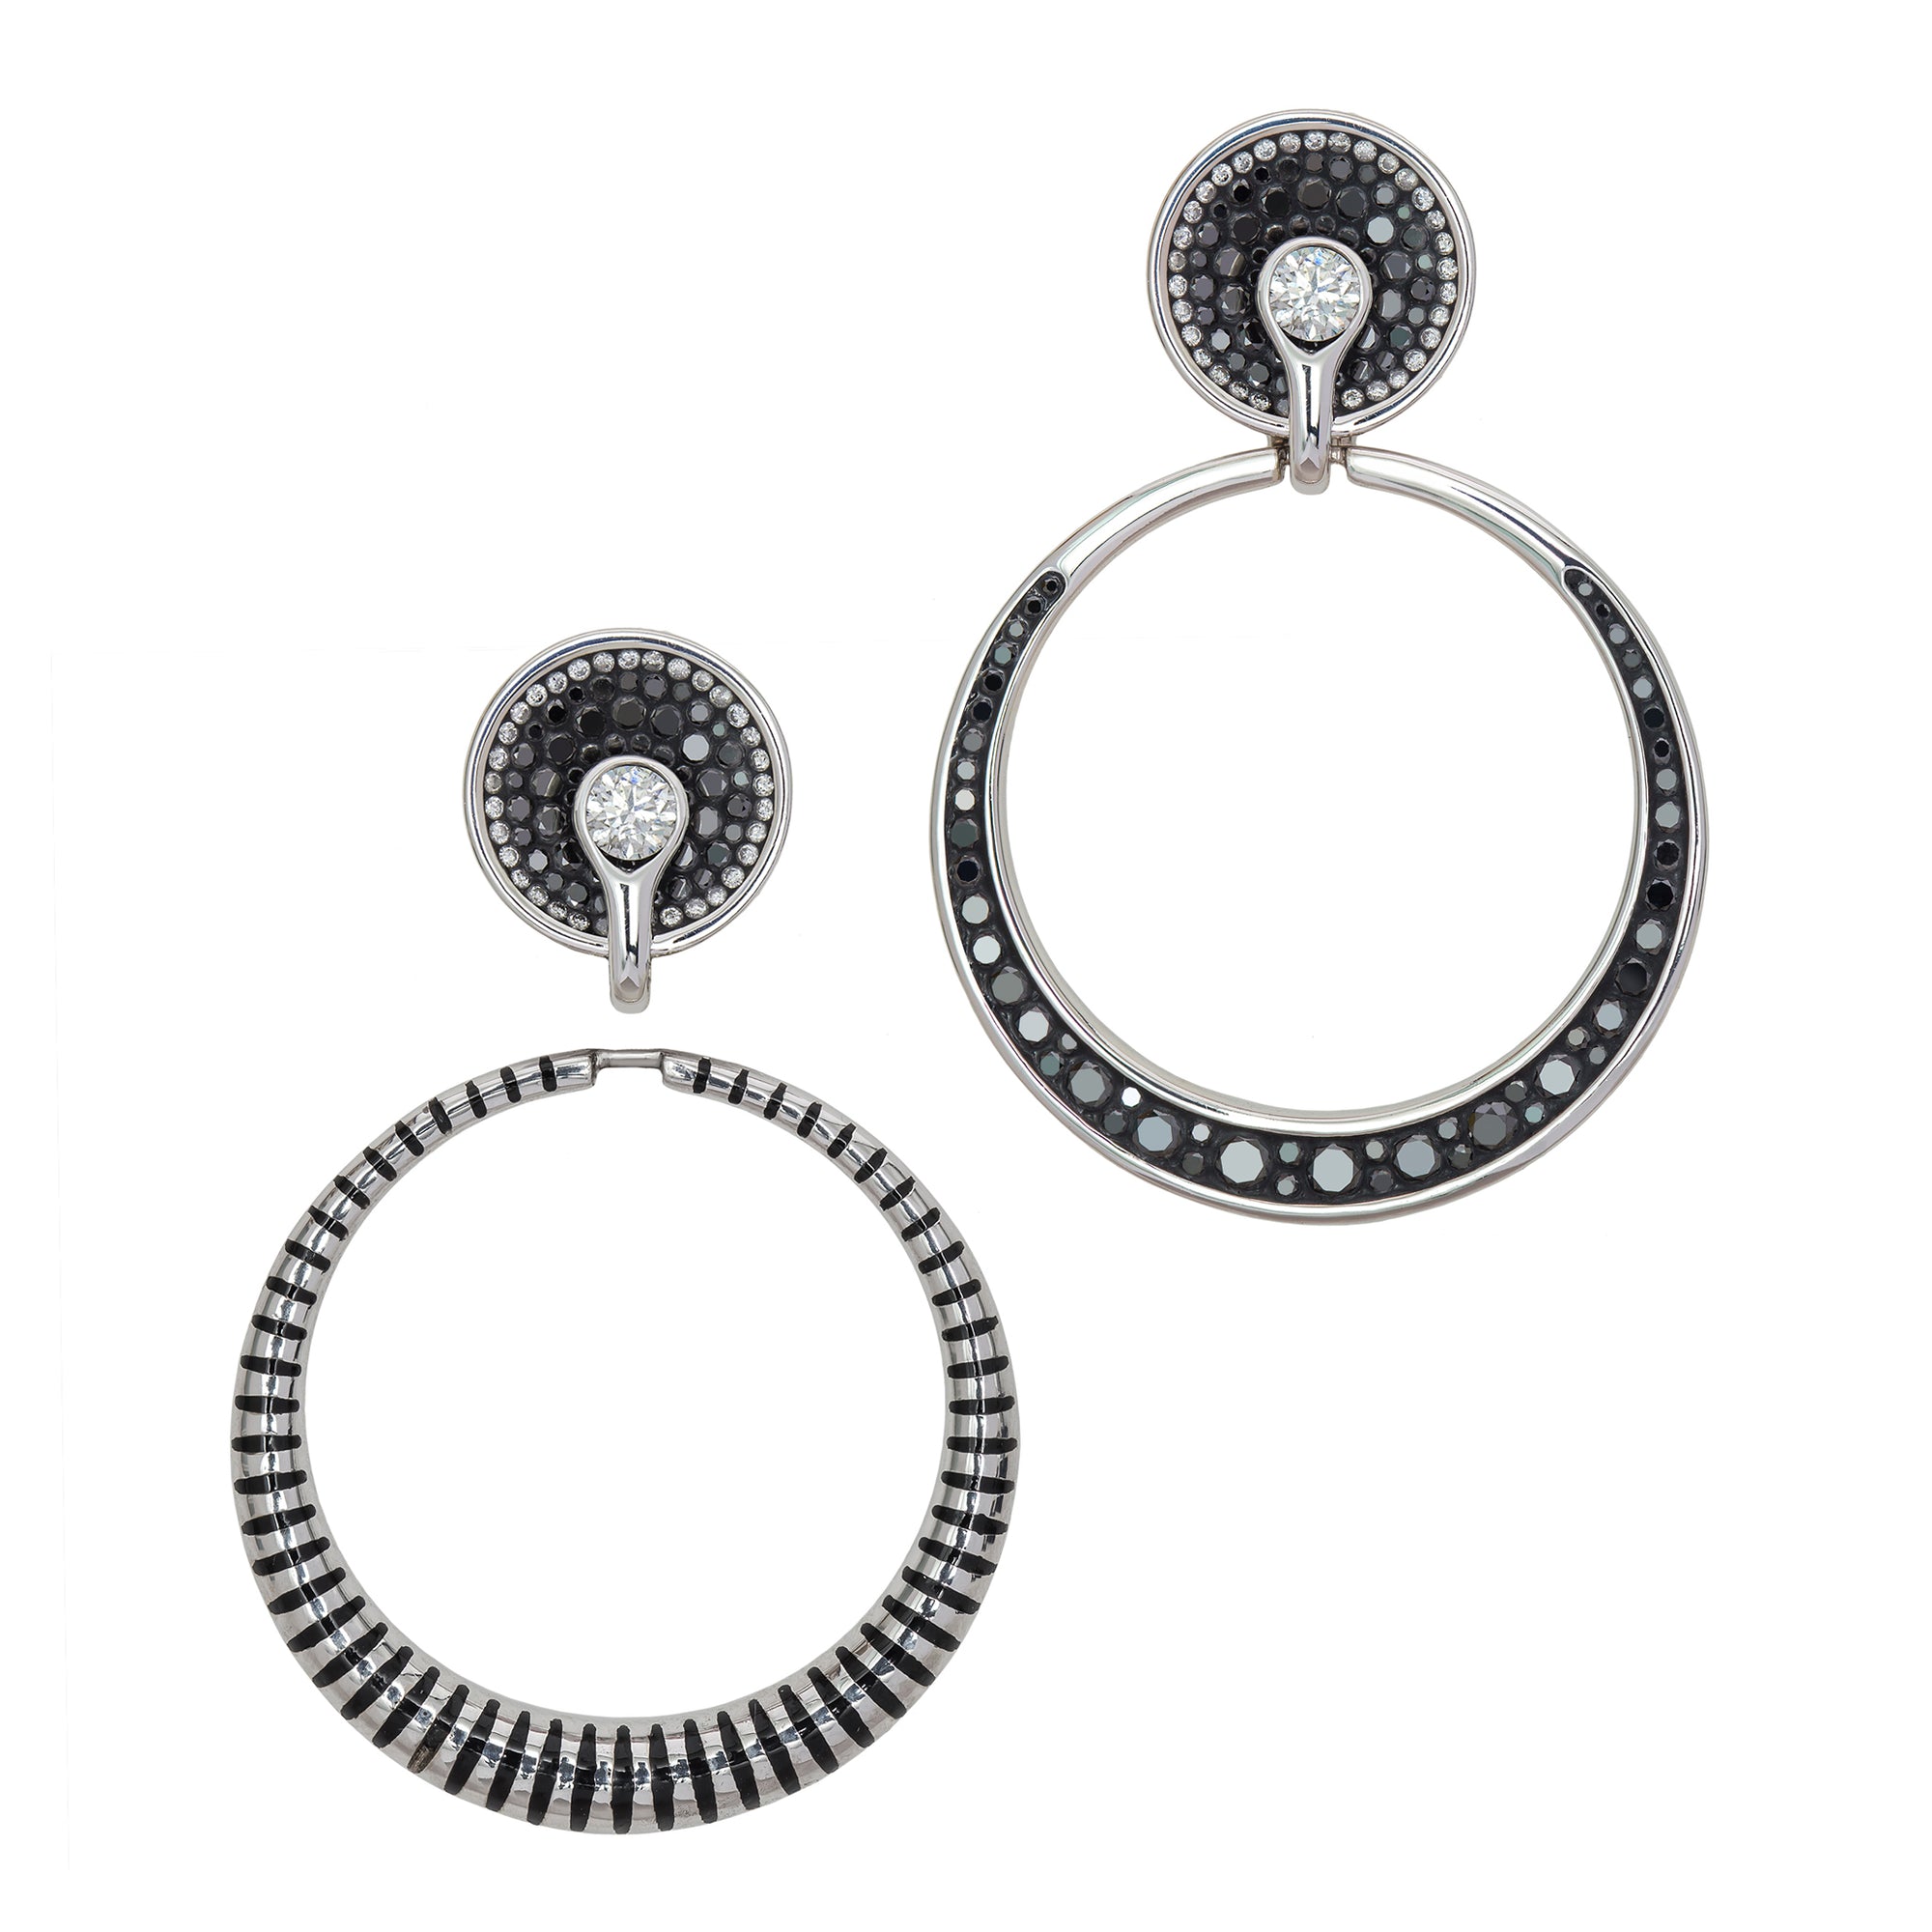 Border Black Opus Hoop Earrings by Pleve available at Talisman Collection Fine Jewelers in El Dorado Hills, CA and online. Specs: Unbelievable convertible 3-in-1 earrings. .15 cttw white & color enhanced diamonds, 18k white gold hoop earrings